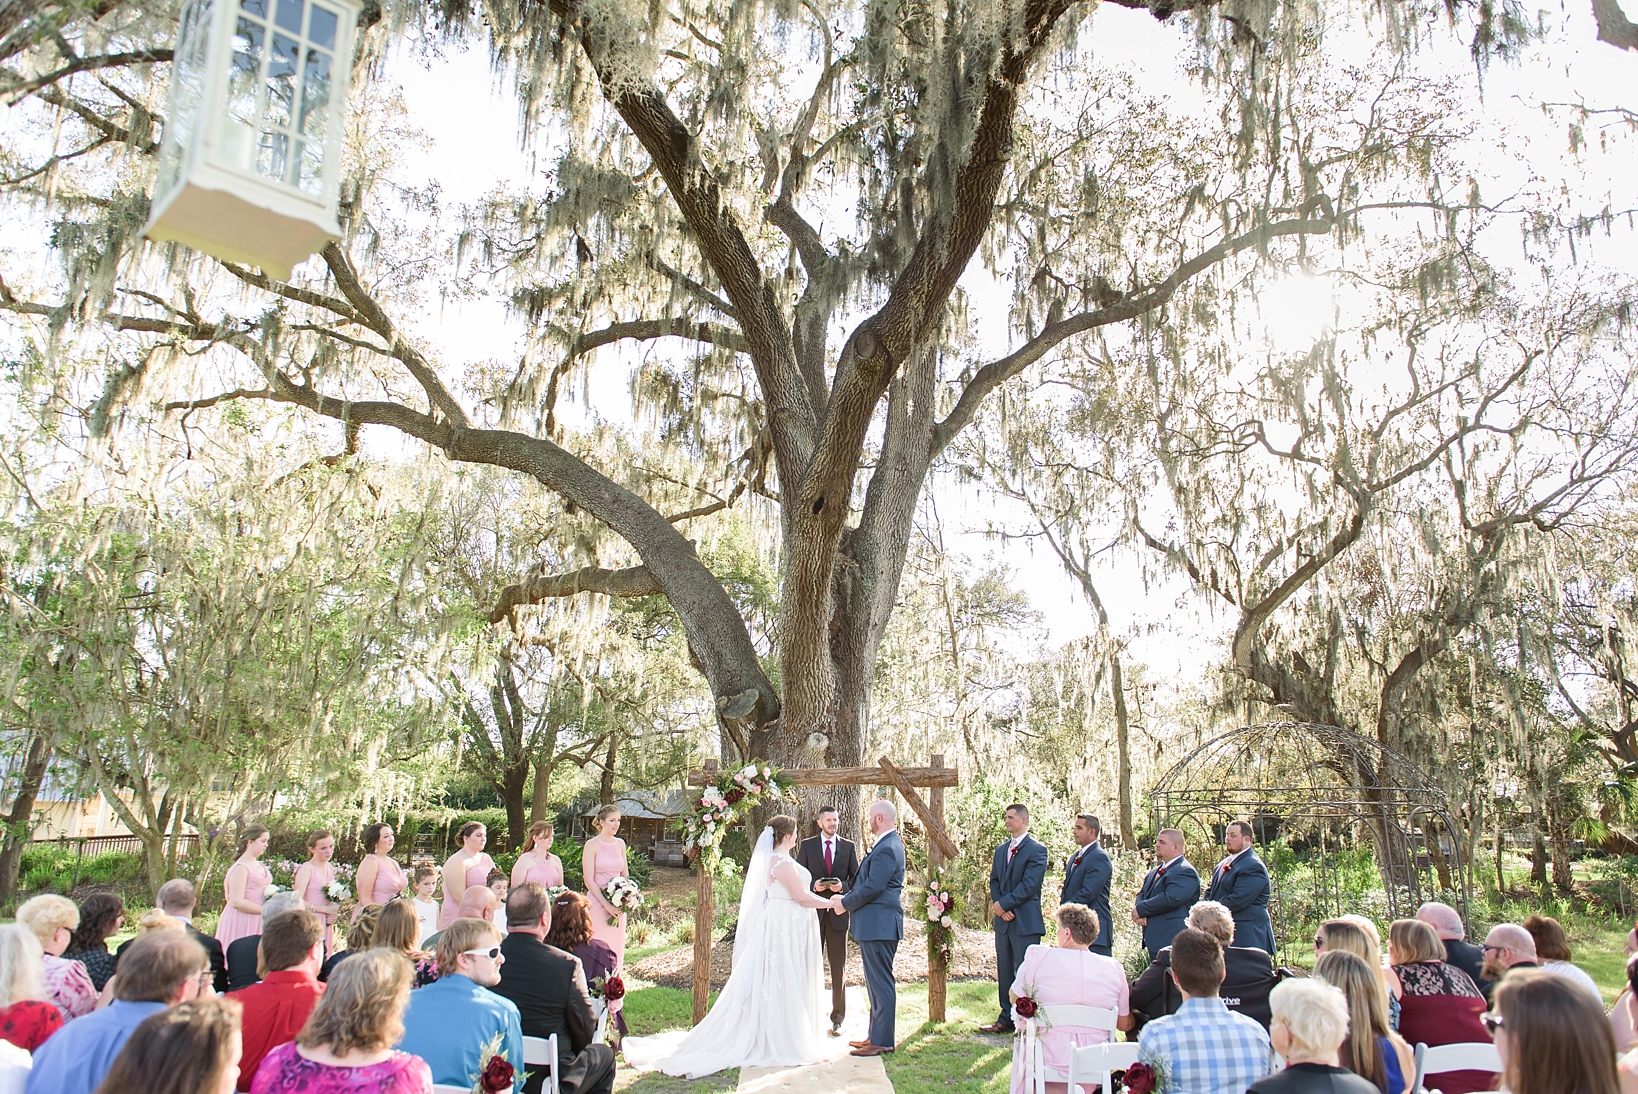 The bride and groom standing at the altar under the oak tree at cross creek ranch by Sarah & Ben Photography